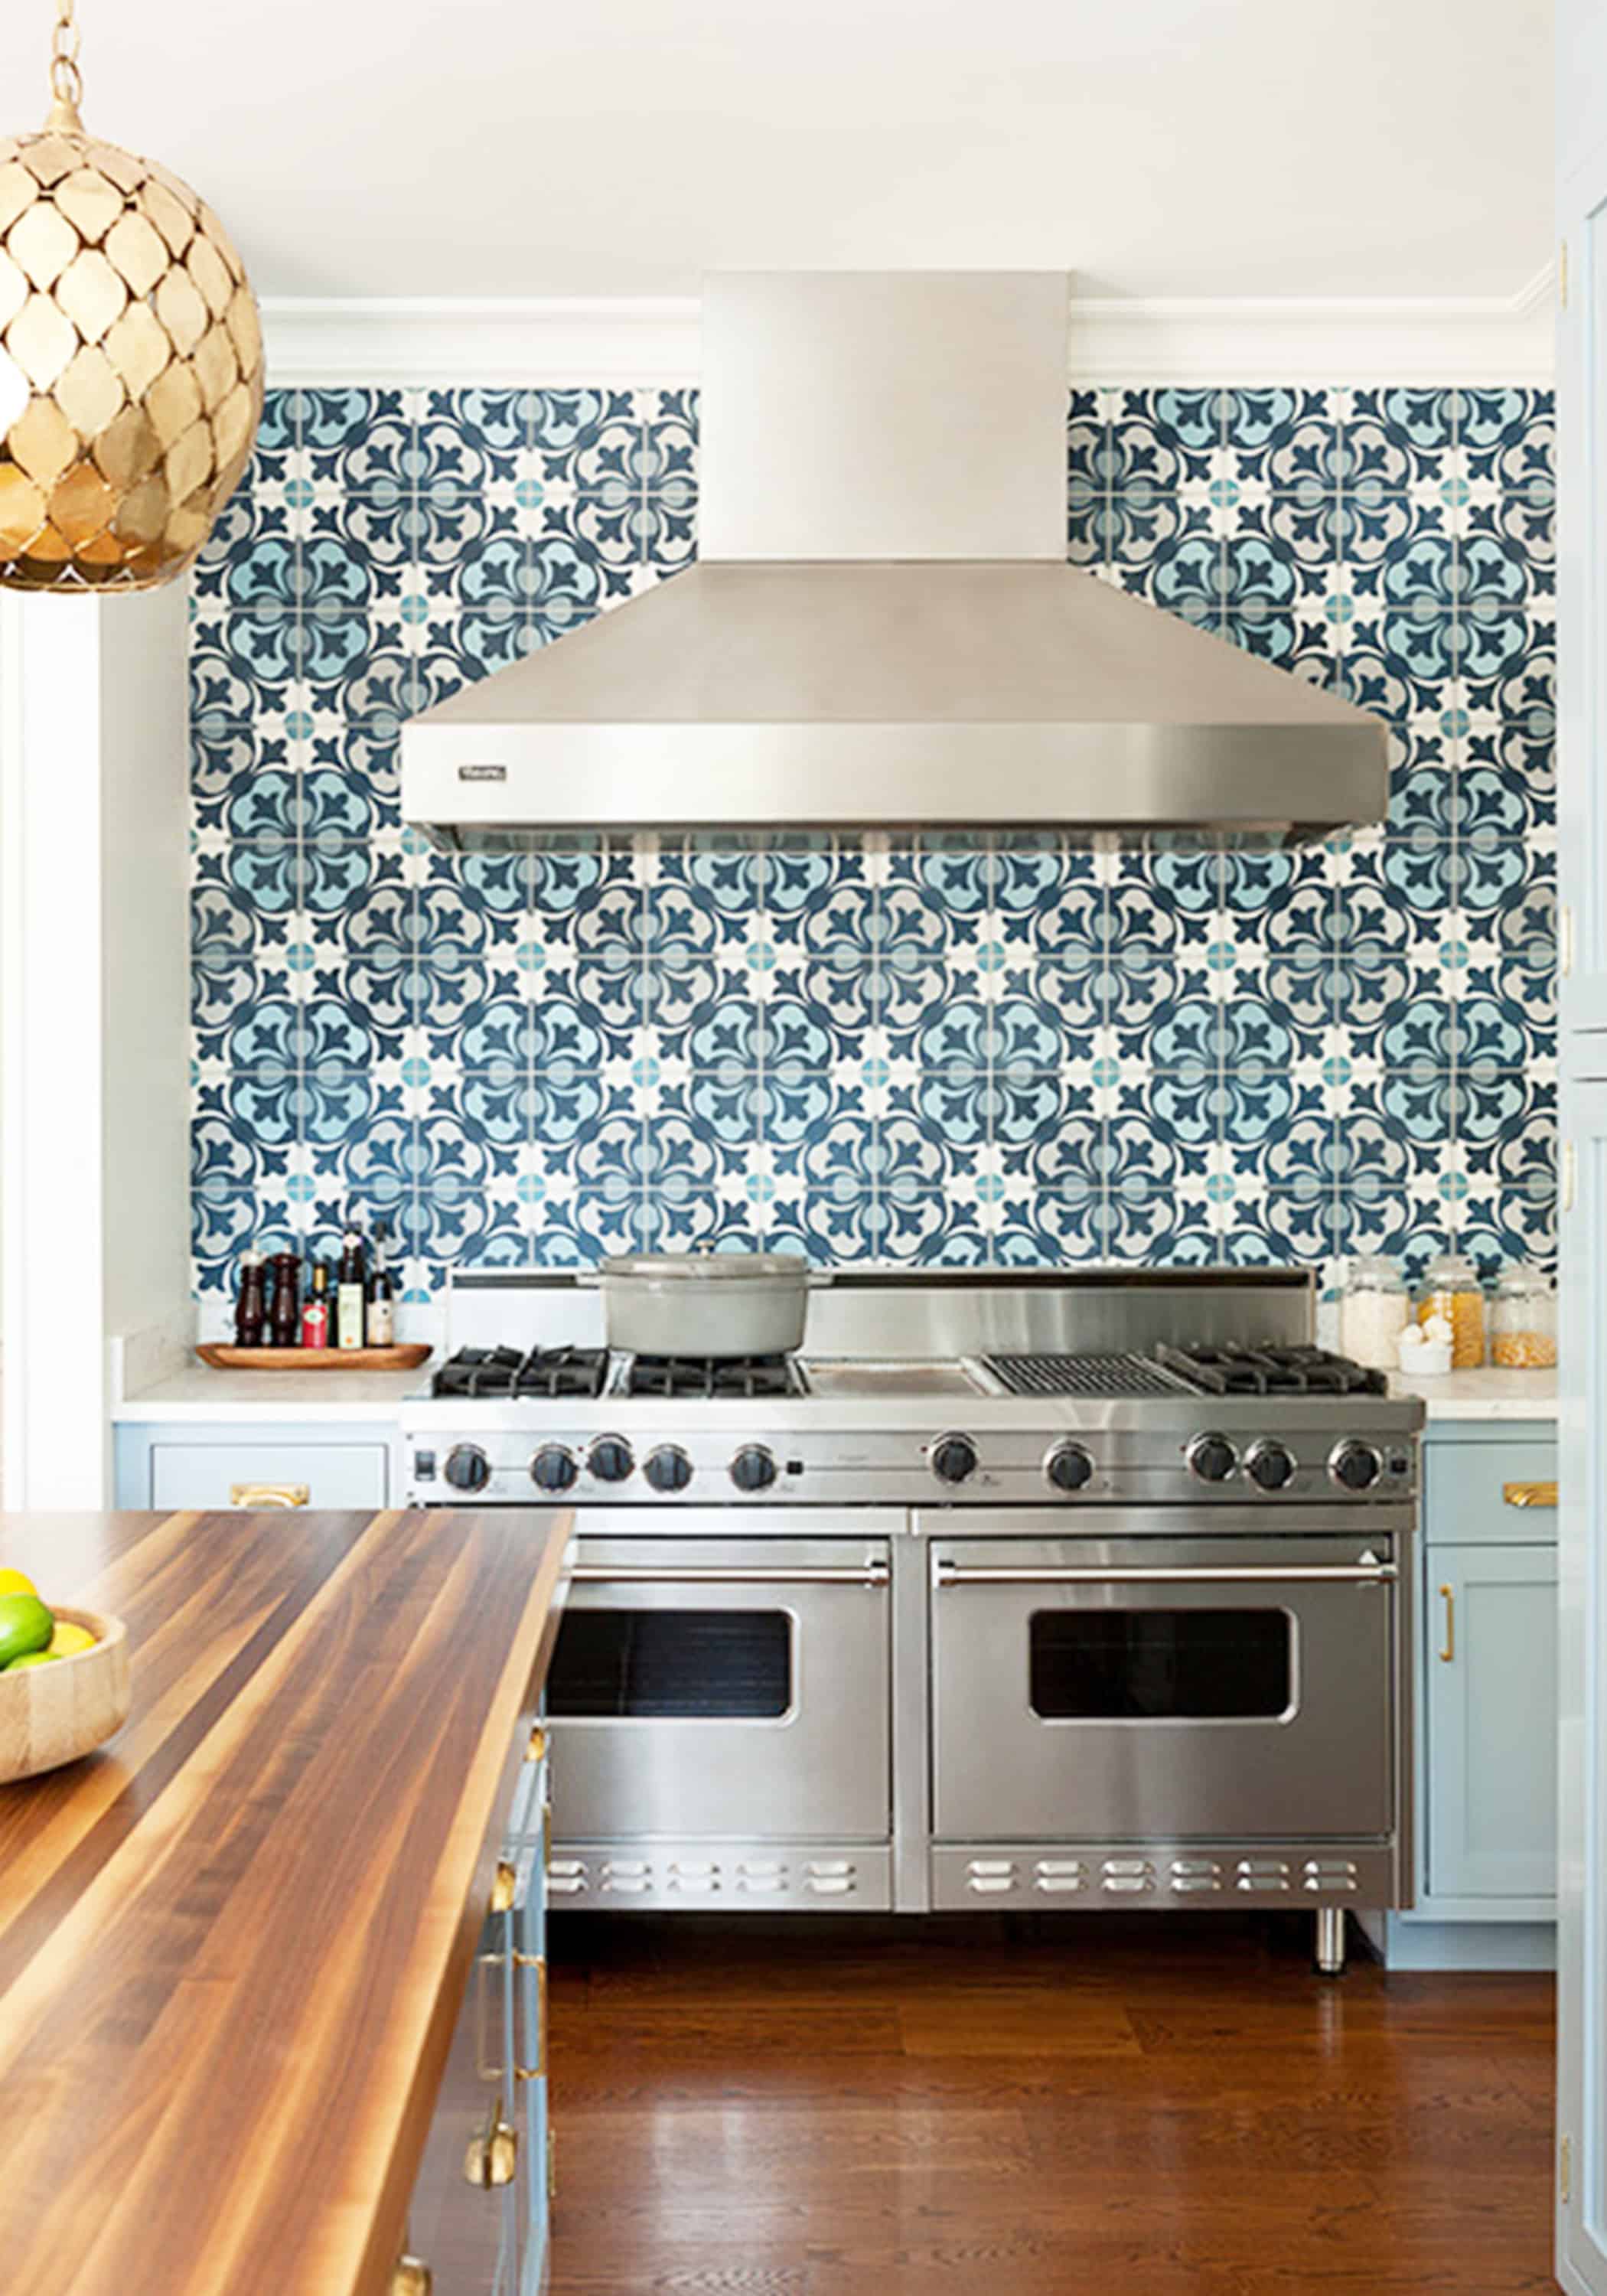 15 Tempting Tile Backsplash Ideas for Behind the Stove COCOCOZY